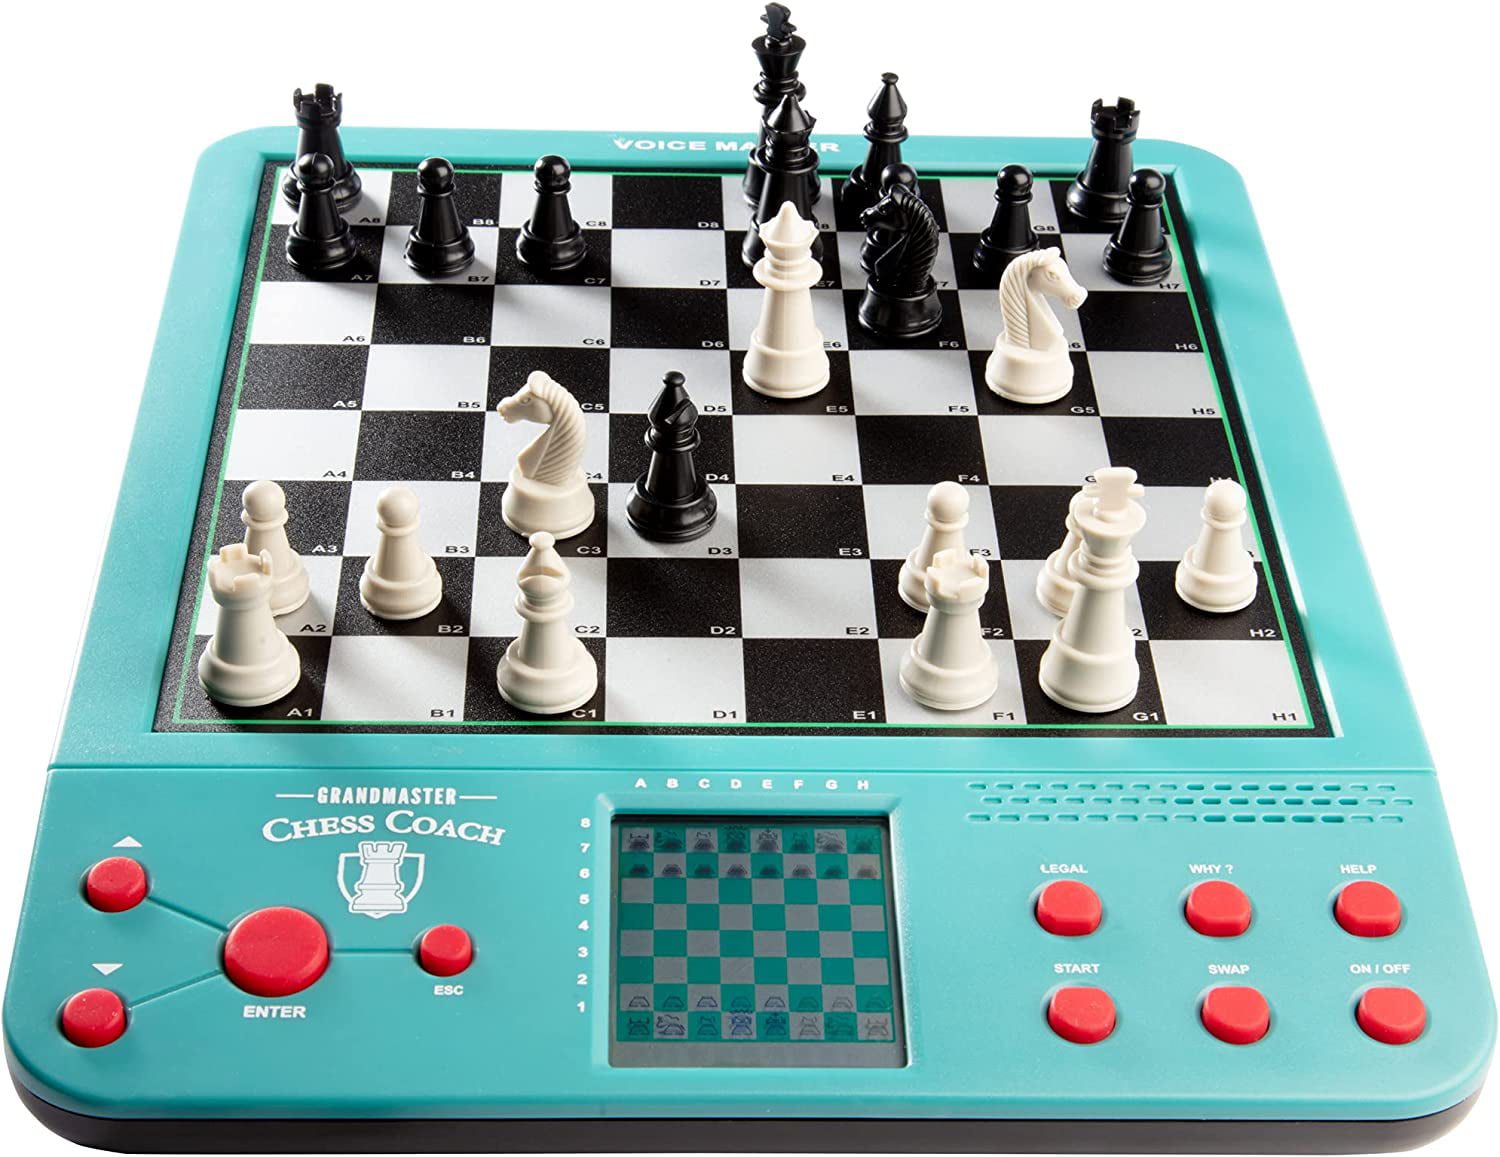 Cyber-chess Beginner's Level: Learn Chess with Fun and Ease